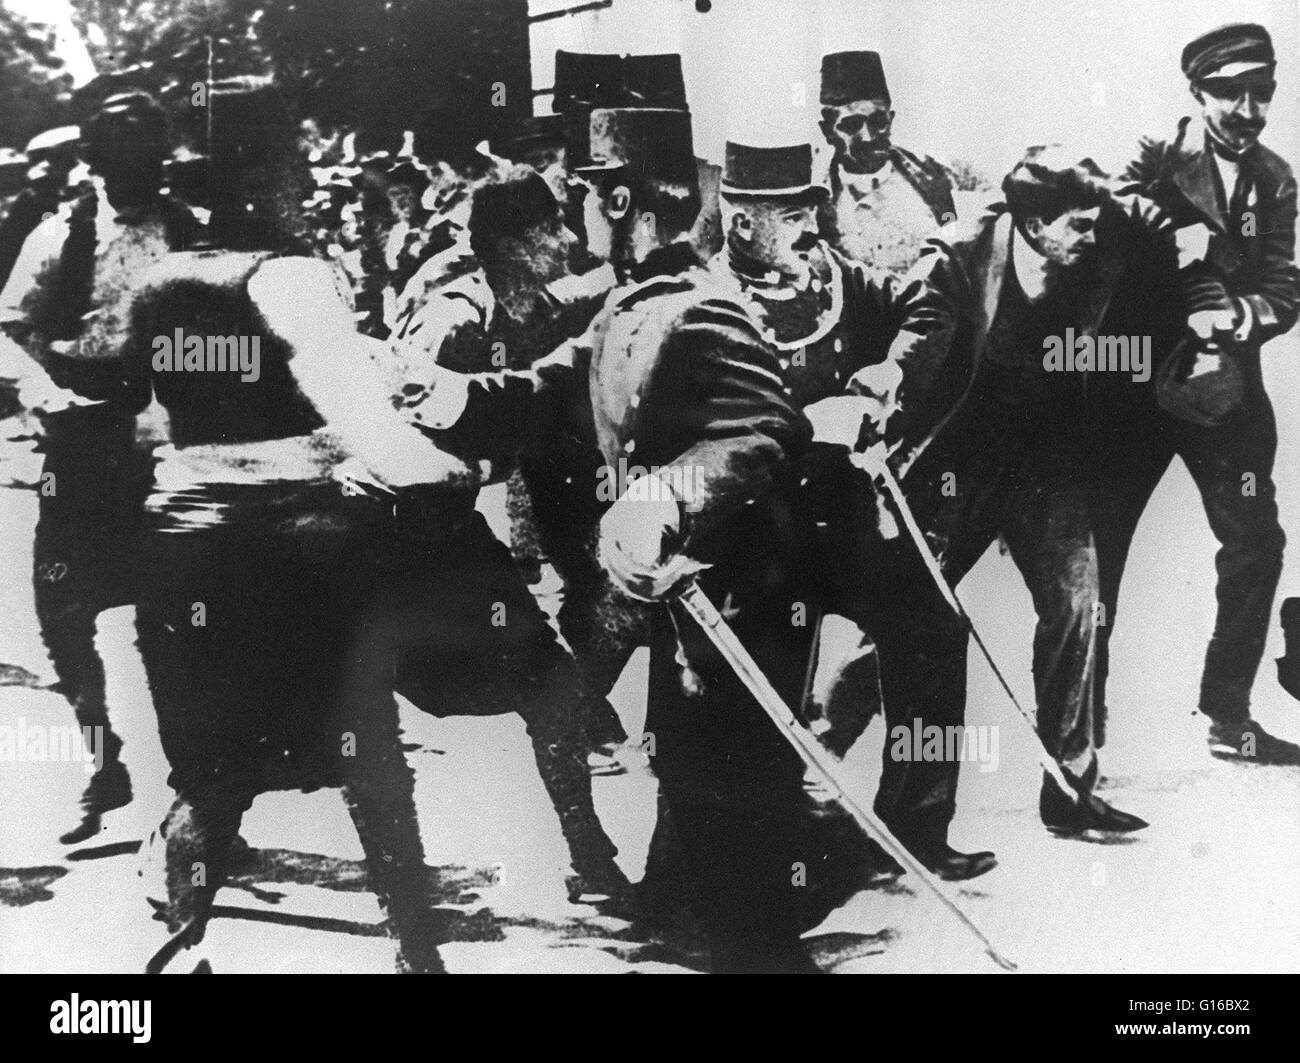 Gavrilo Princip (July 25, 1894 - April 28, 1918) was a Bosnian Serb who assassinated Archduke Franz Ferdinand of Austria and his wife, Sophie, Duchess of Hohenberg, on June 28, 1914. Princip and his accomplices were arrested and implicated by a number of Stock Photo